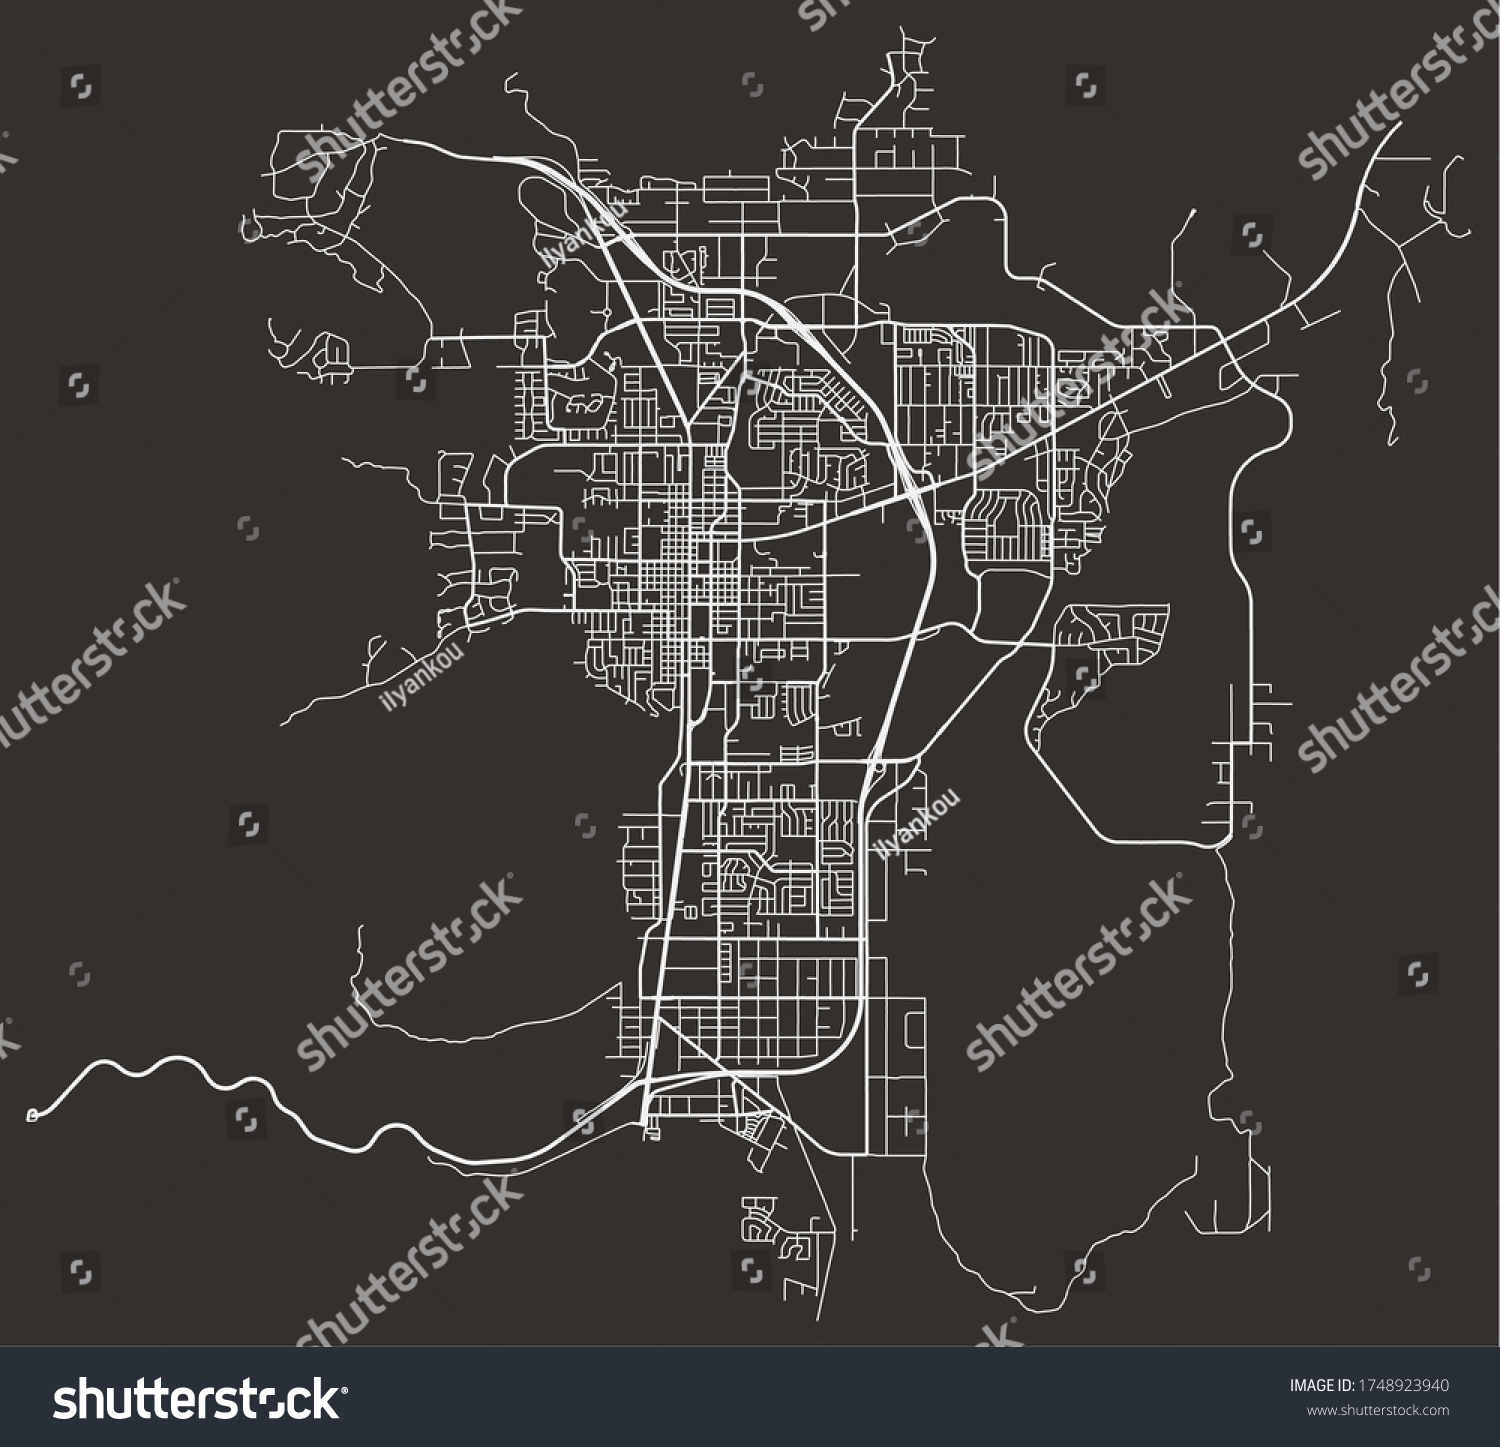 SVG of Carson City, Nevada, United States city plan–roads and highways, downtown and suburbs, town blueprint poster, transport network svg